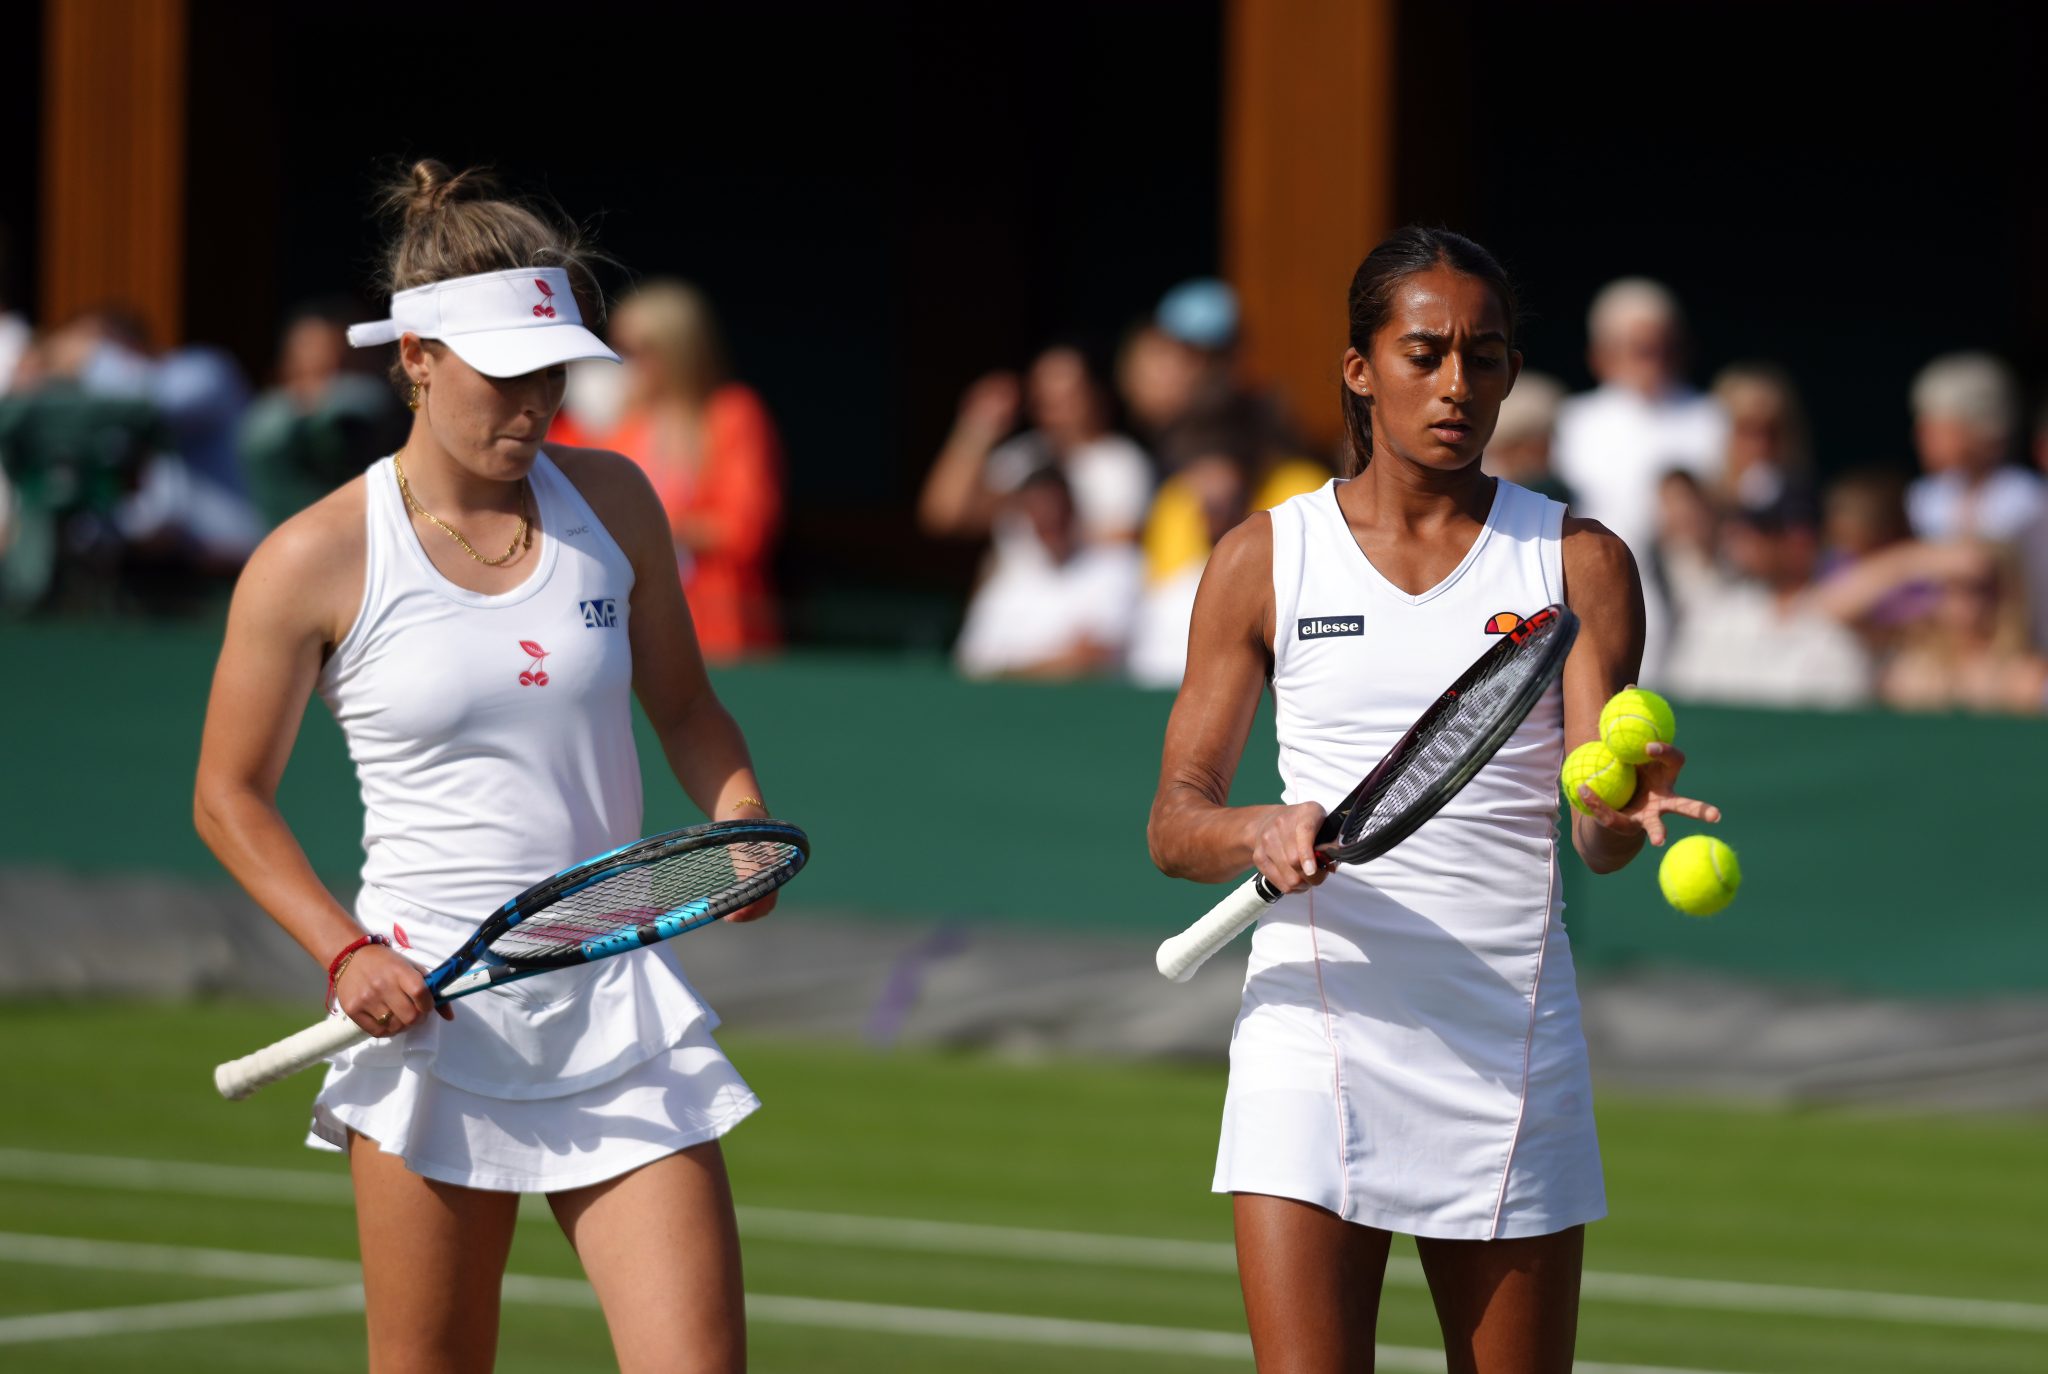 Best all-British women’s doubles run at Wimbledon since 1983 comes to an end